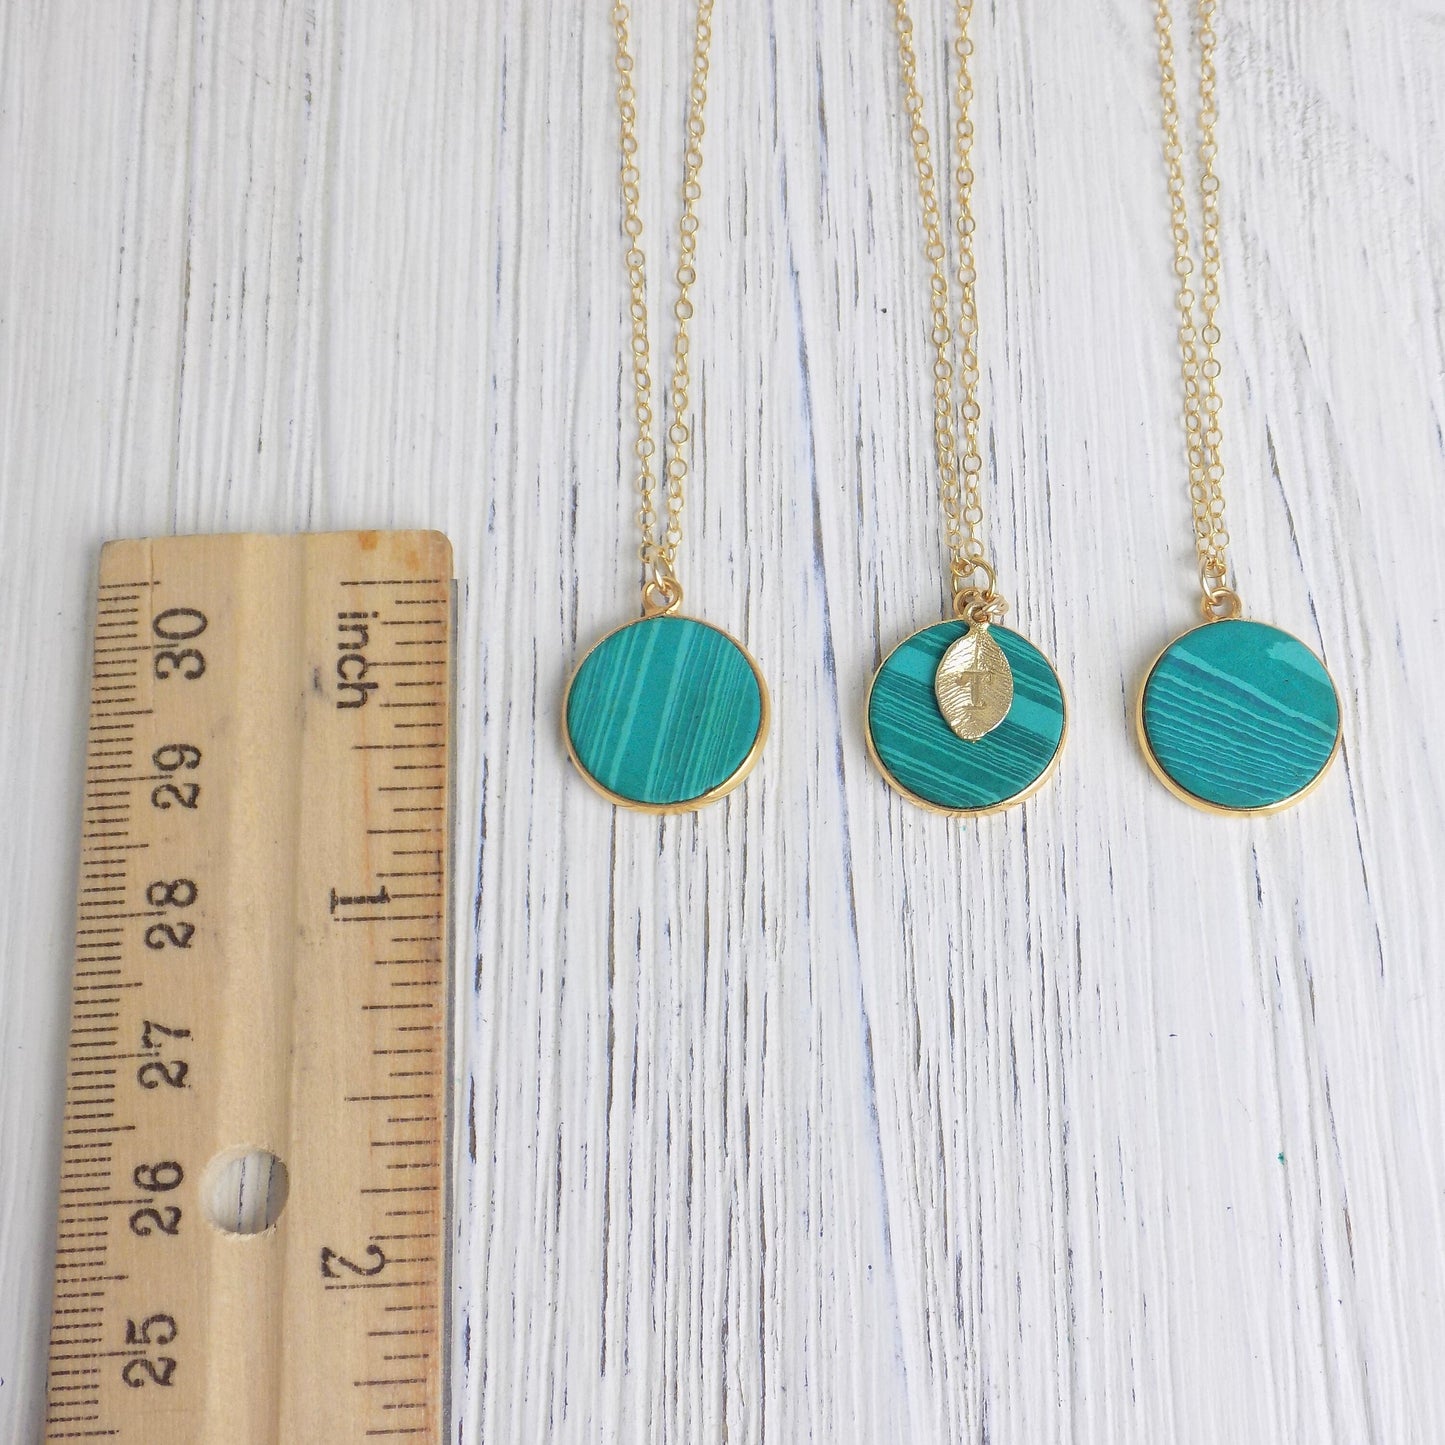 Custom Green Malachite Necklace Gold, Gifts For Mom, M6-34